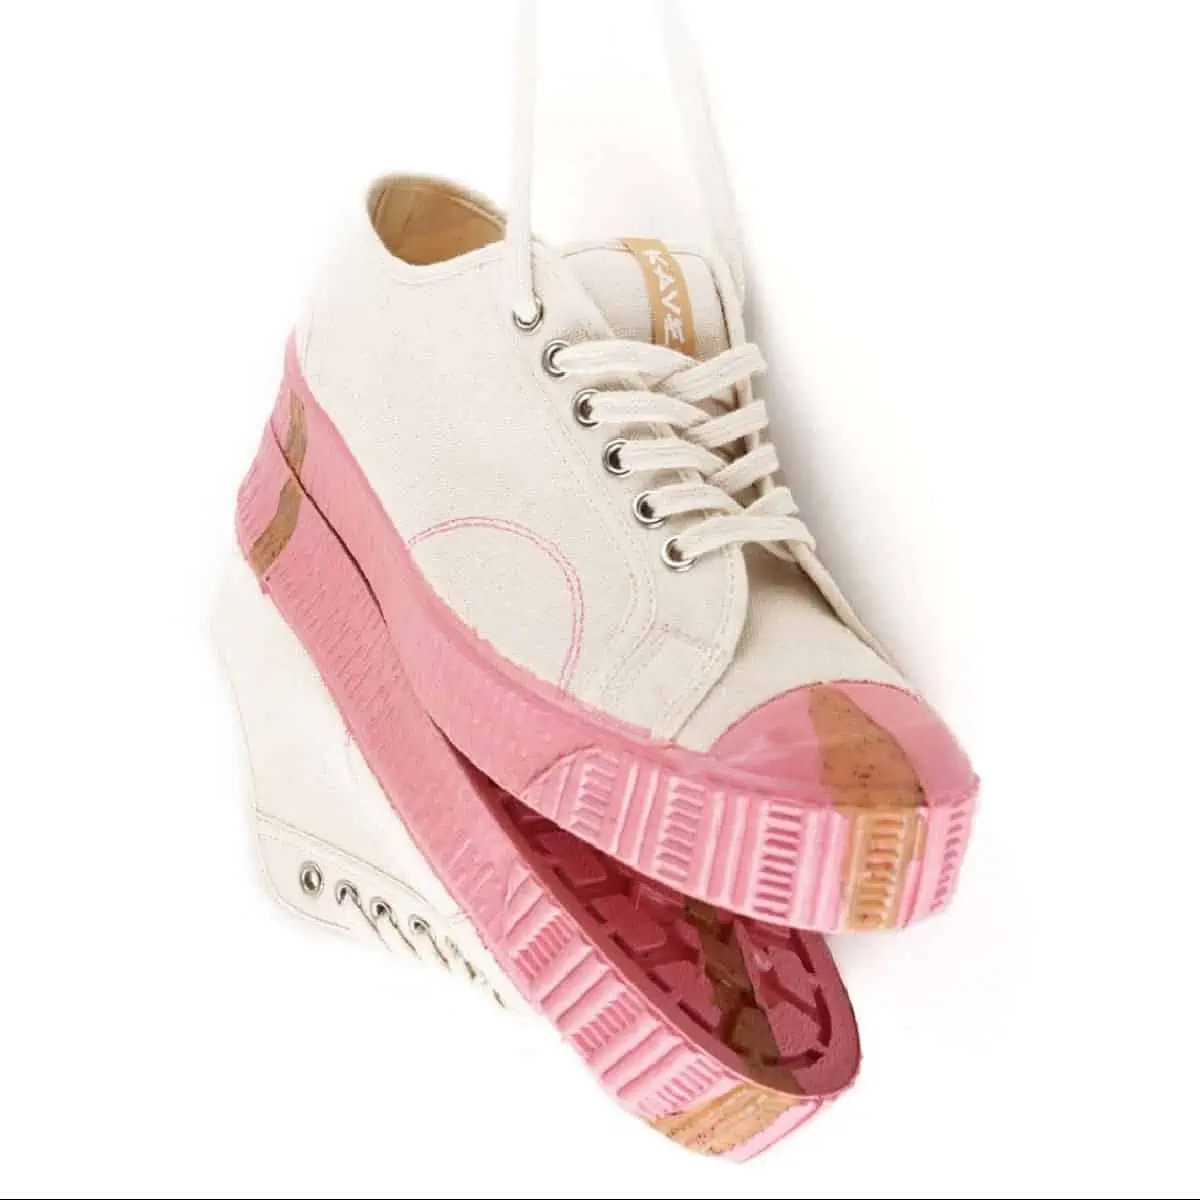 A pair of pink and cream Kave Footwear vegan sneakers hanging up by the laces against a white background.